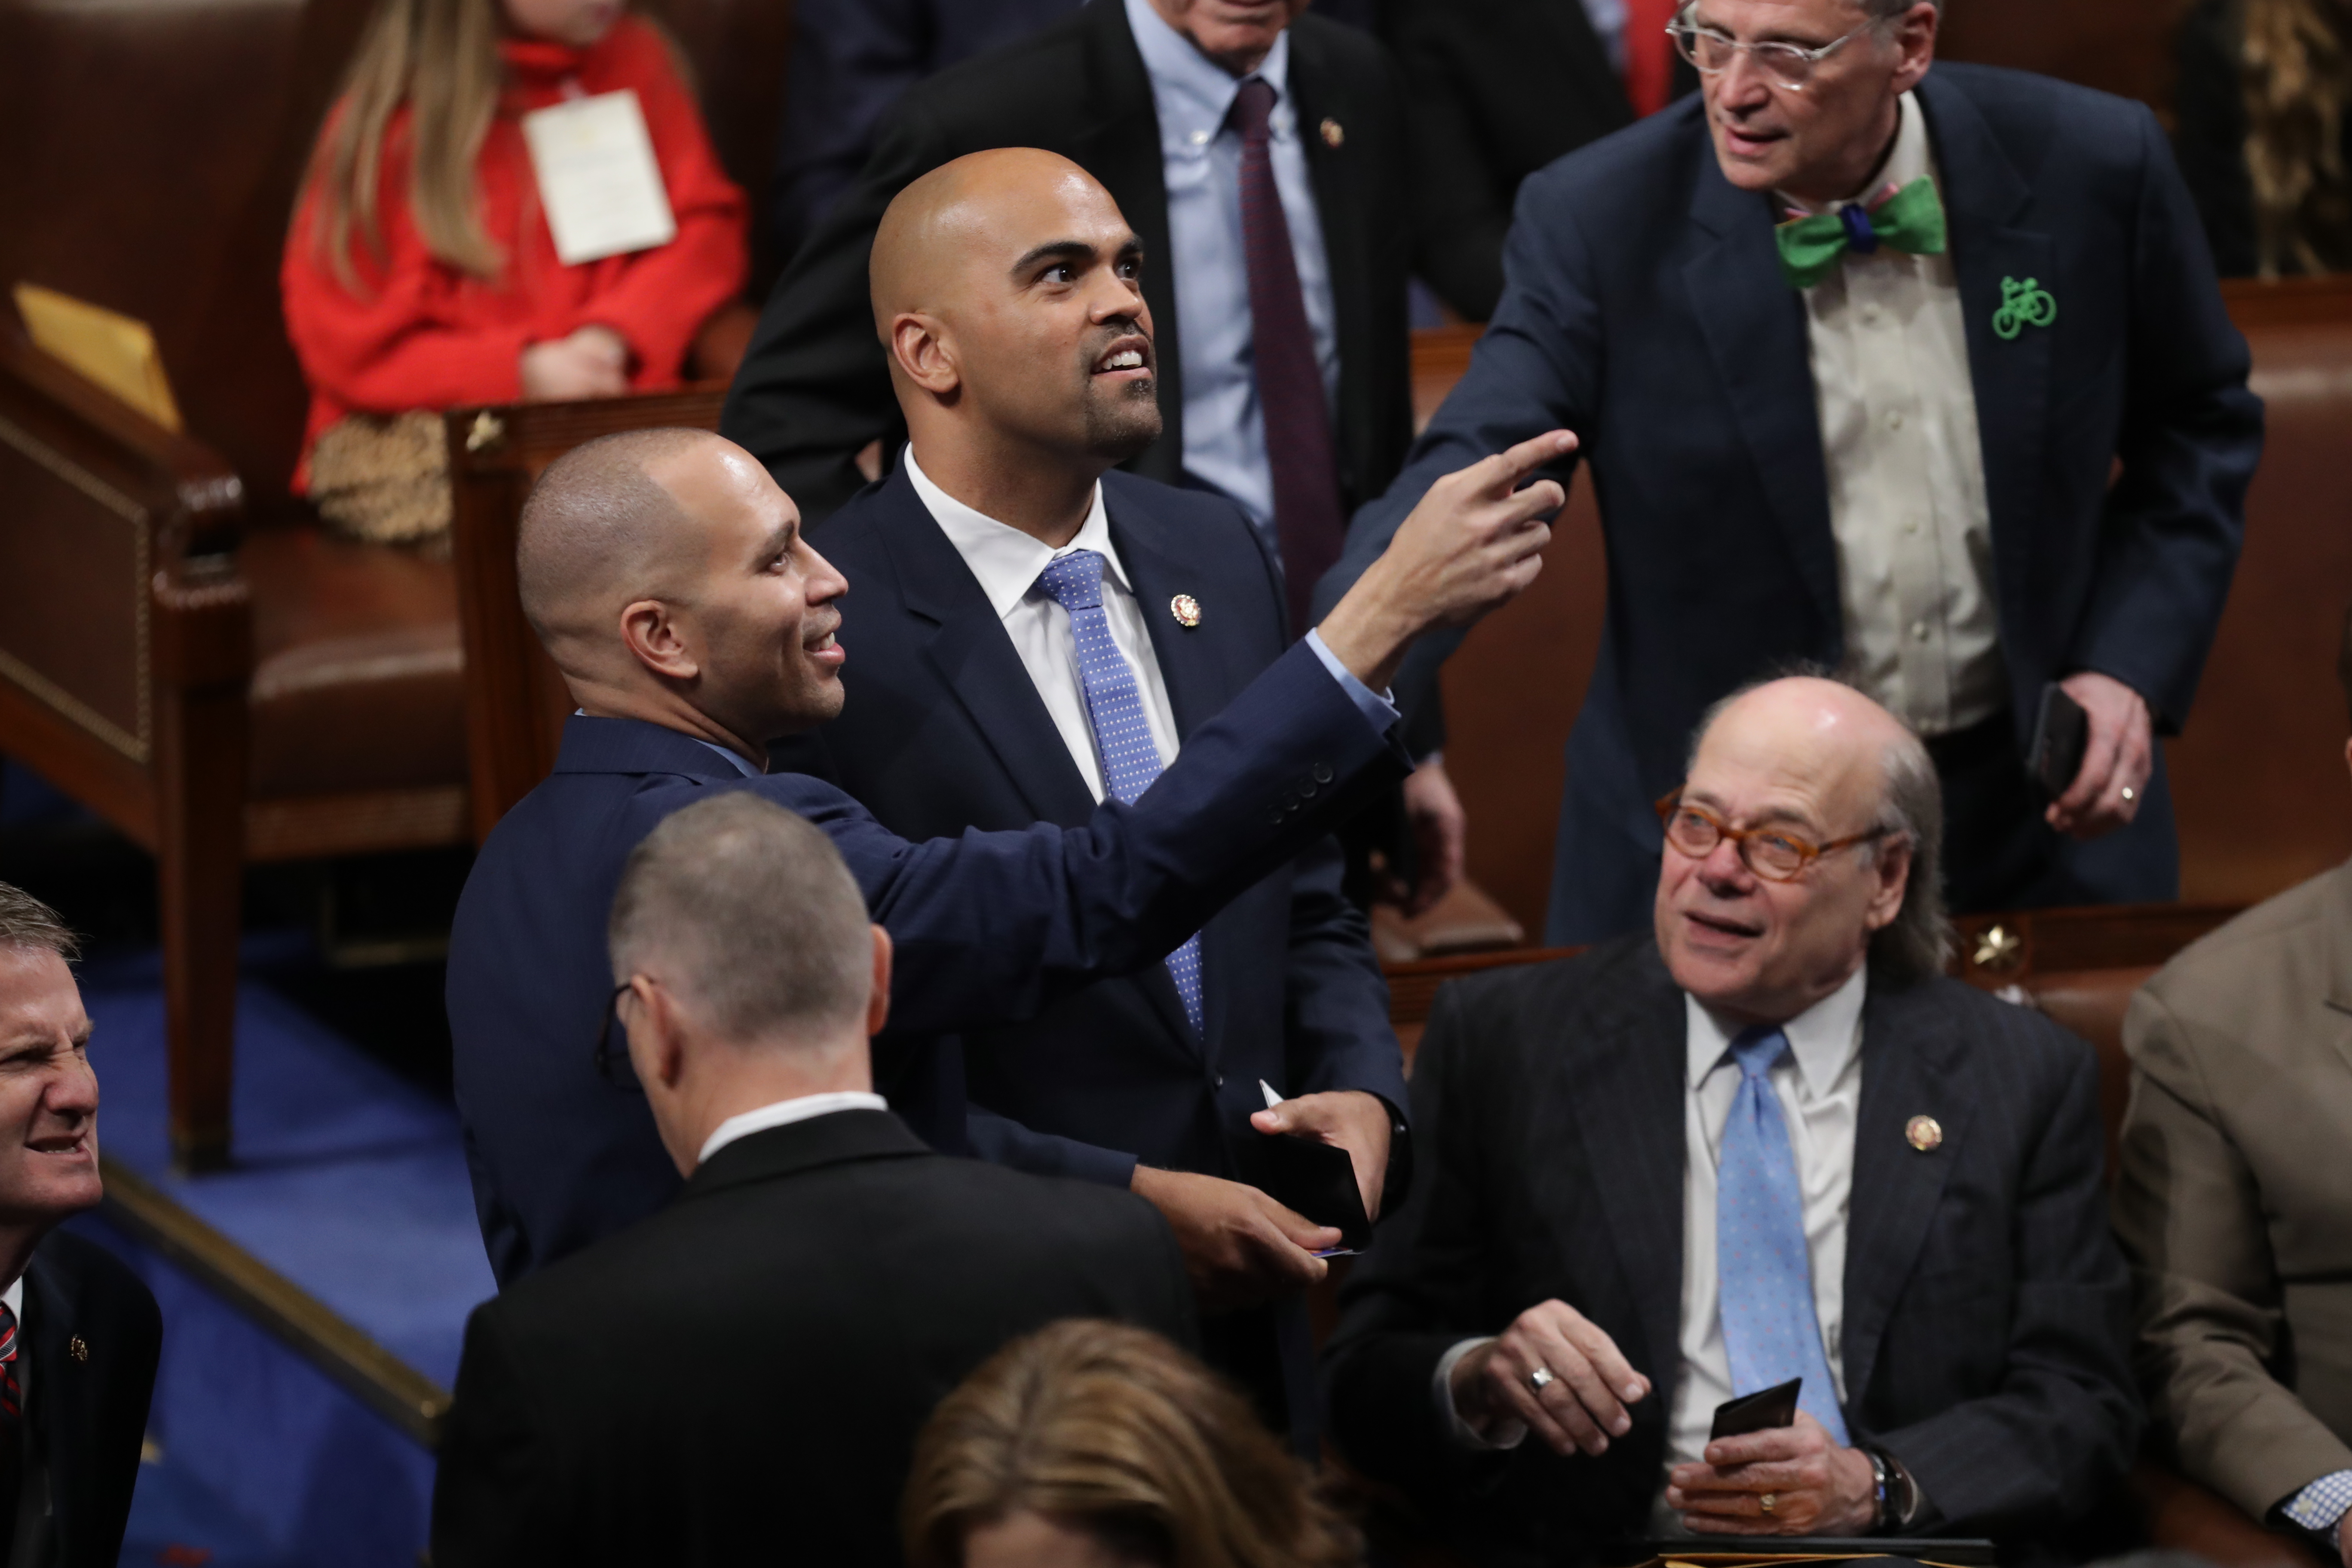 Rep.-elect Colin Allred (D-TX) registers as present with help from U.S. Rep. Hakeem Jeffries (D-NY) during the first session of the 116th Congress at the U.S. Capitol January 03, 2019 in Washington, DC. Chip Somodevilla/Getty Images